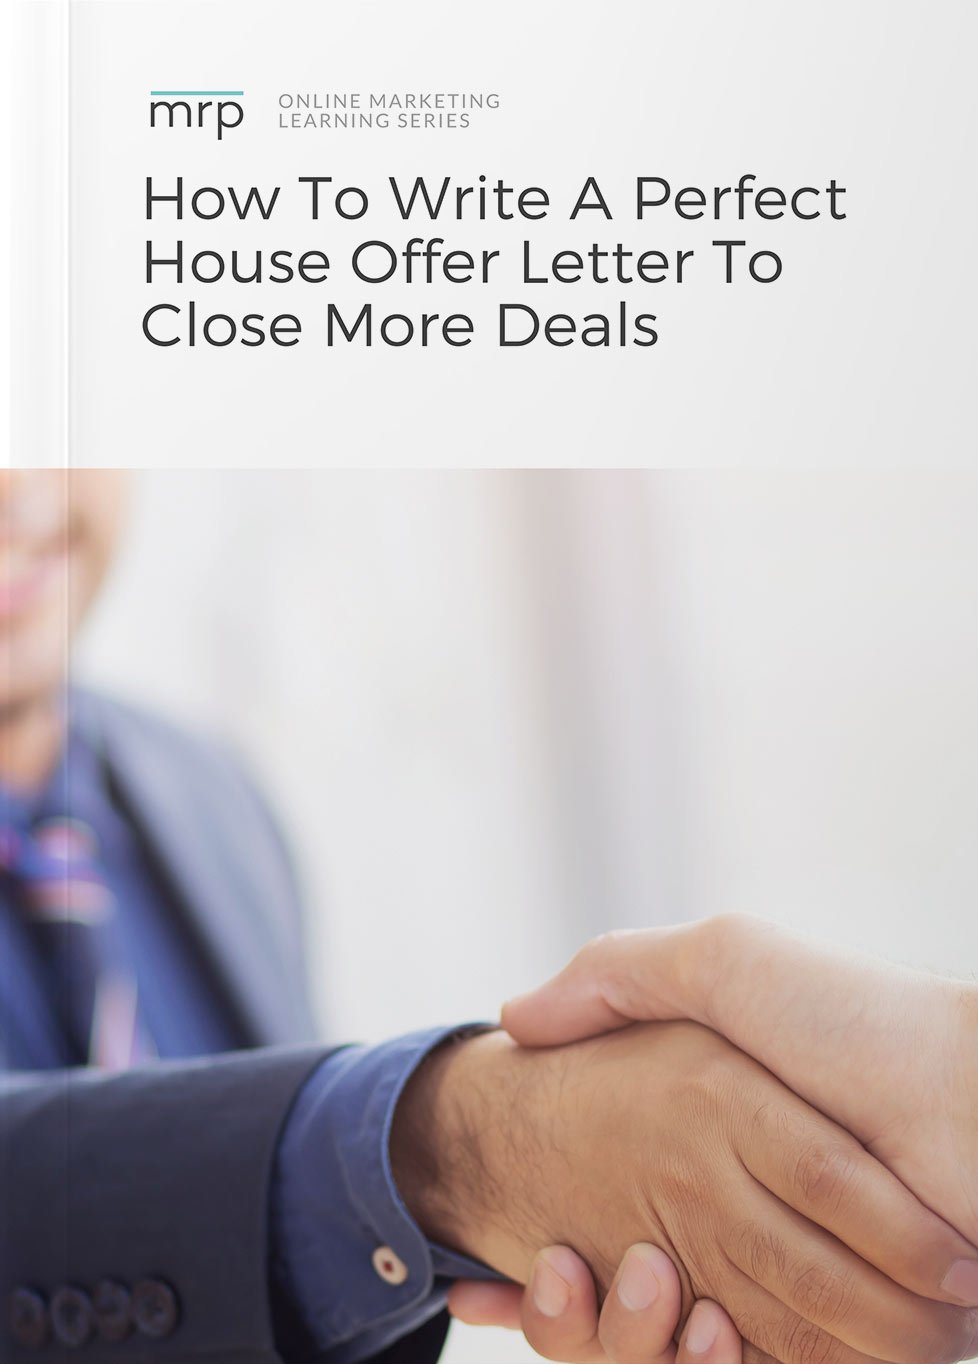 How-To-Write-A-Perfect-House-Offer-Letter-To-Close-More-Deals